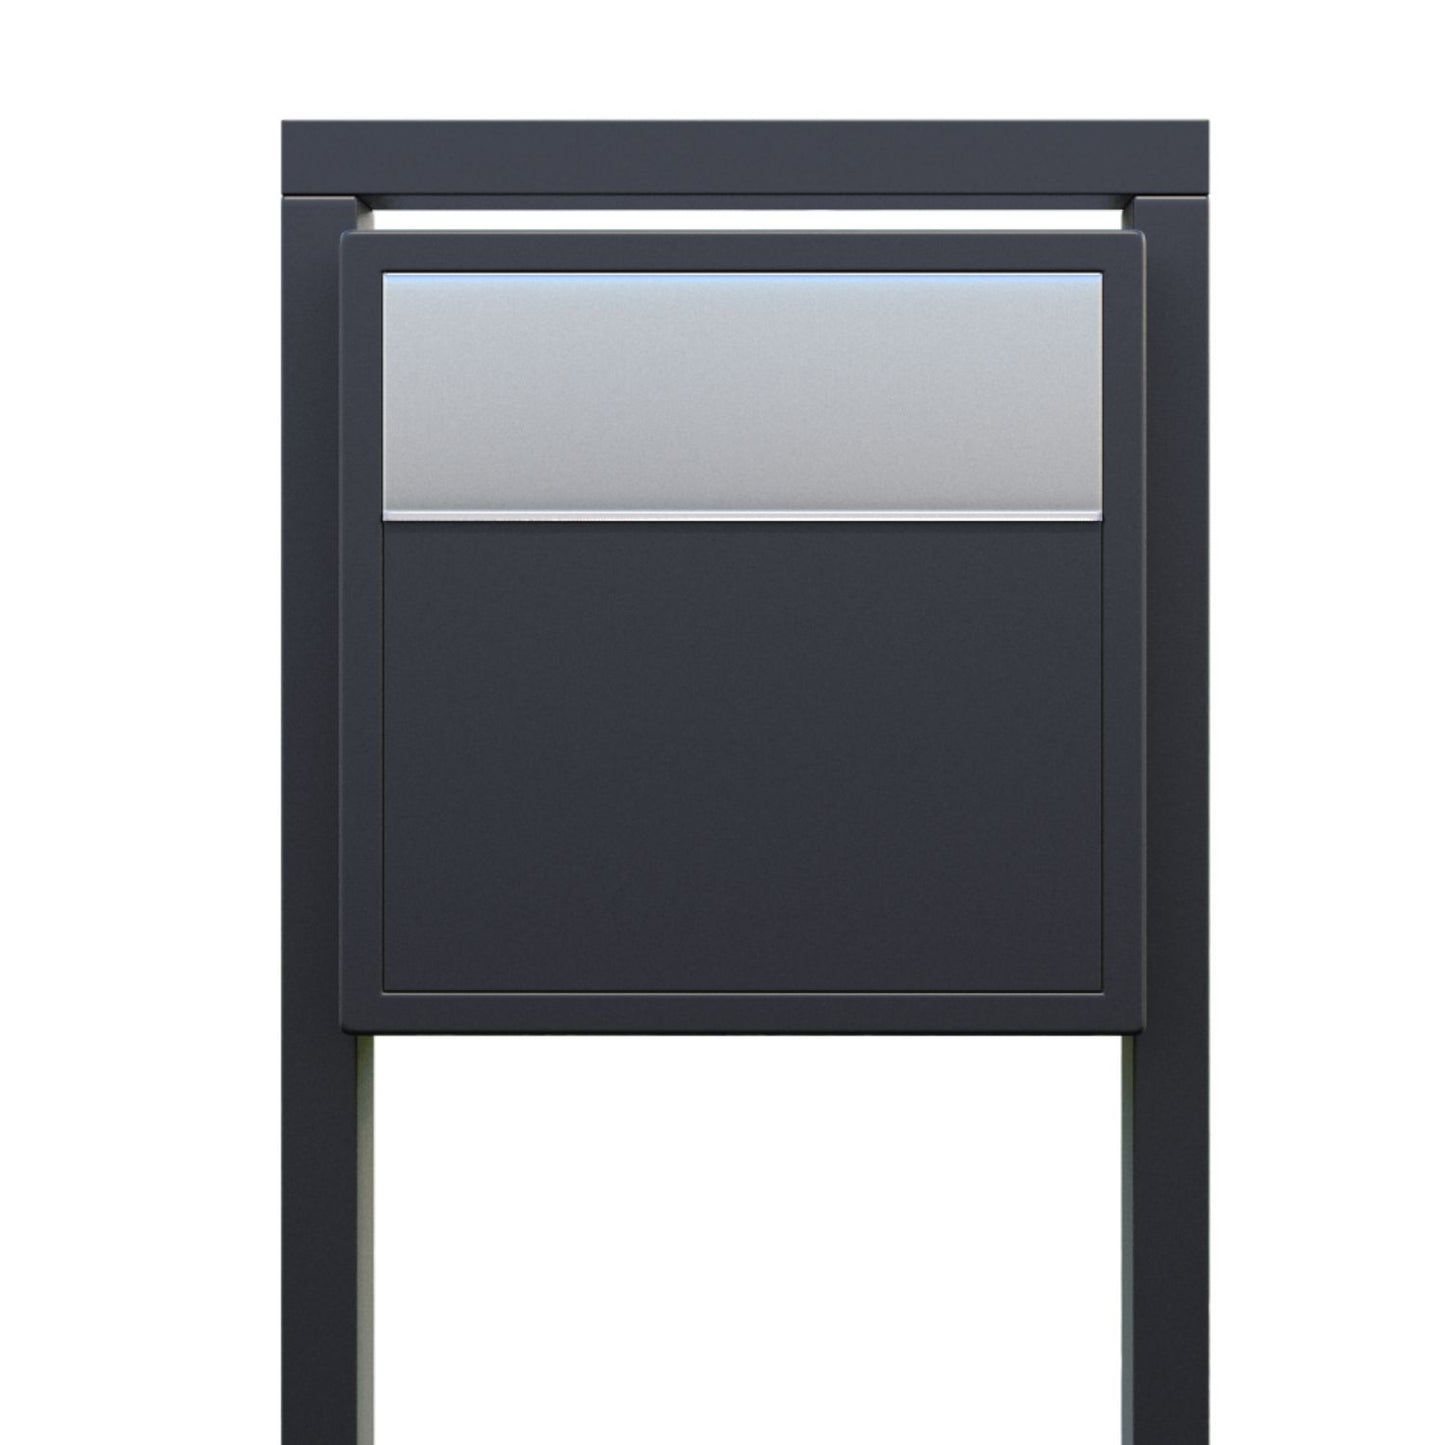 SOPRANO by Bravios - Modern post-mounted anthracite mailbox with stainless steel flap